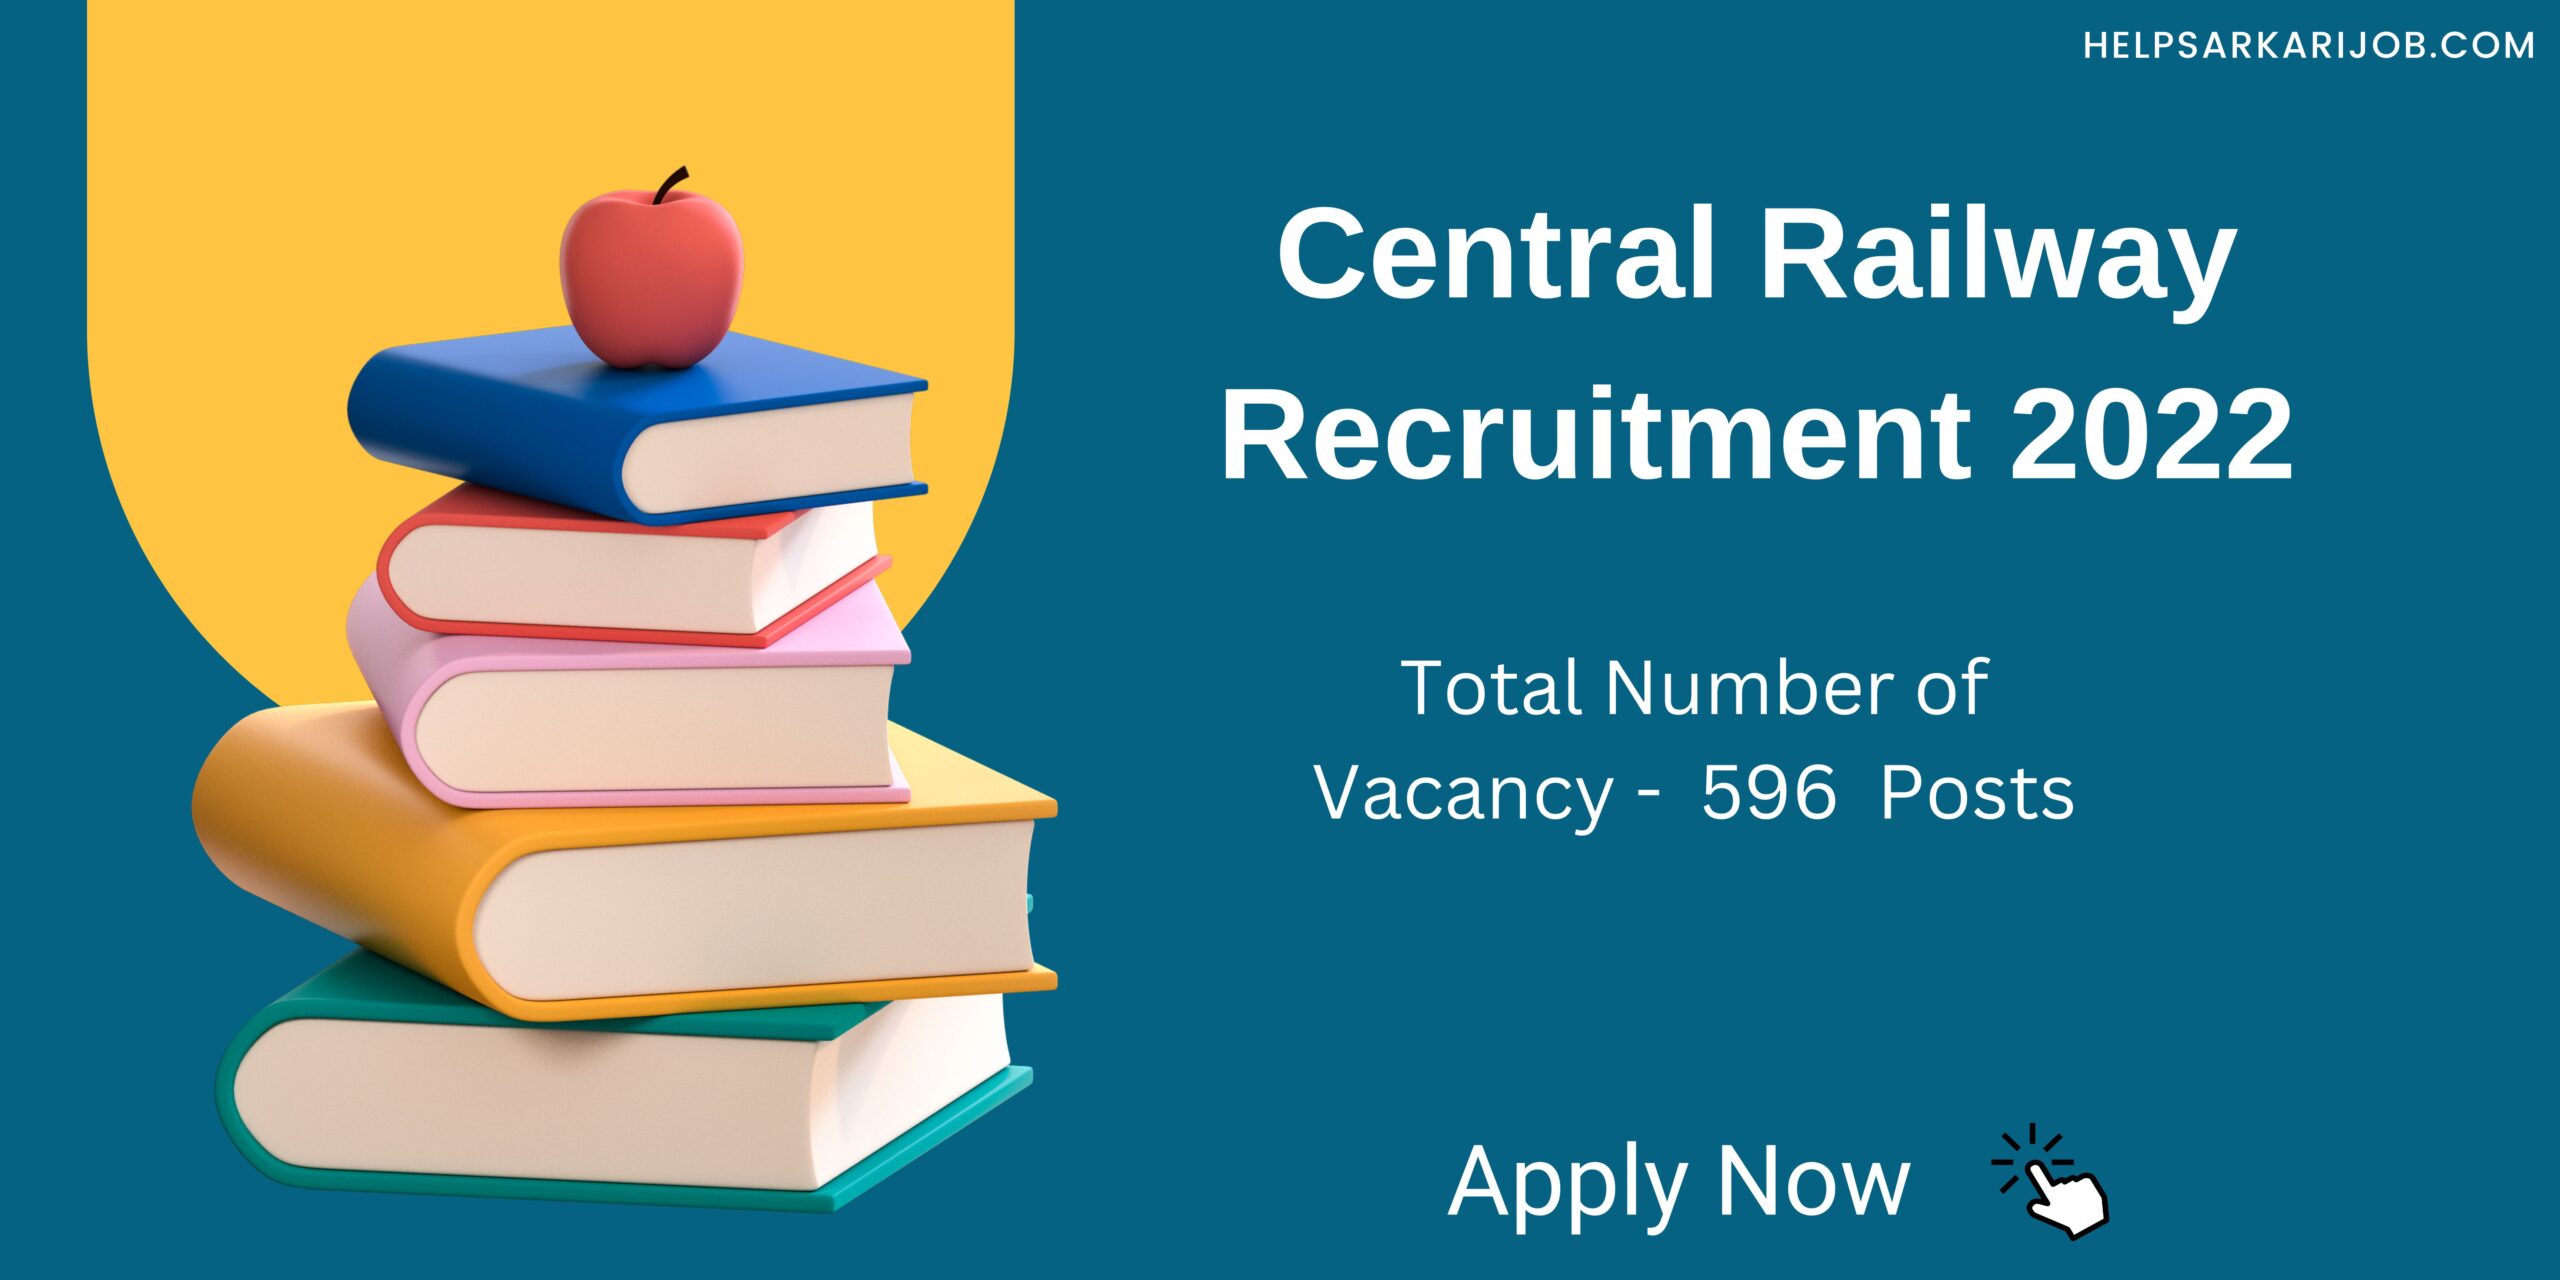 Central Railway Recruitment 2022 scaled -